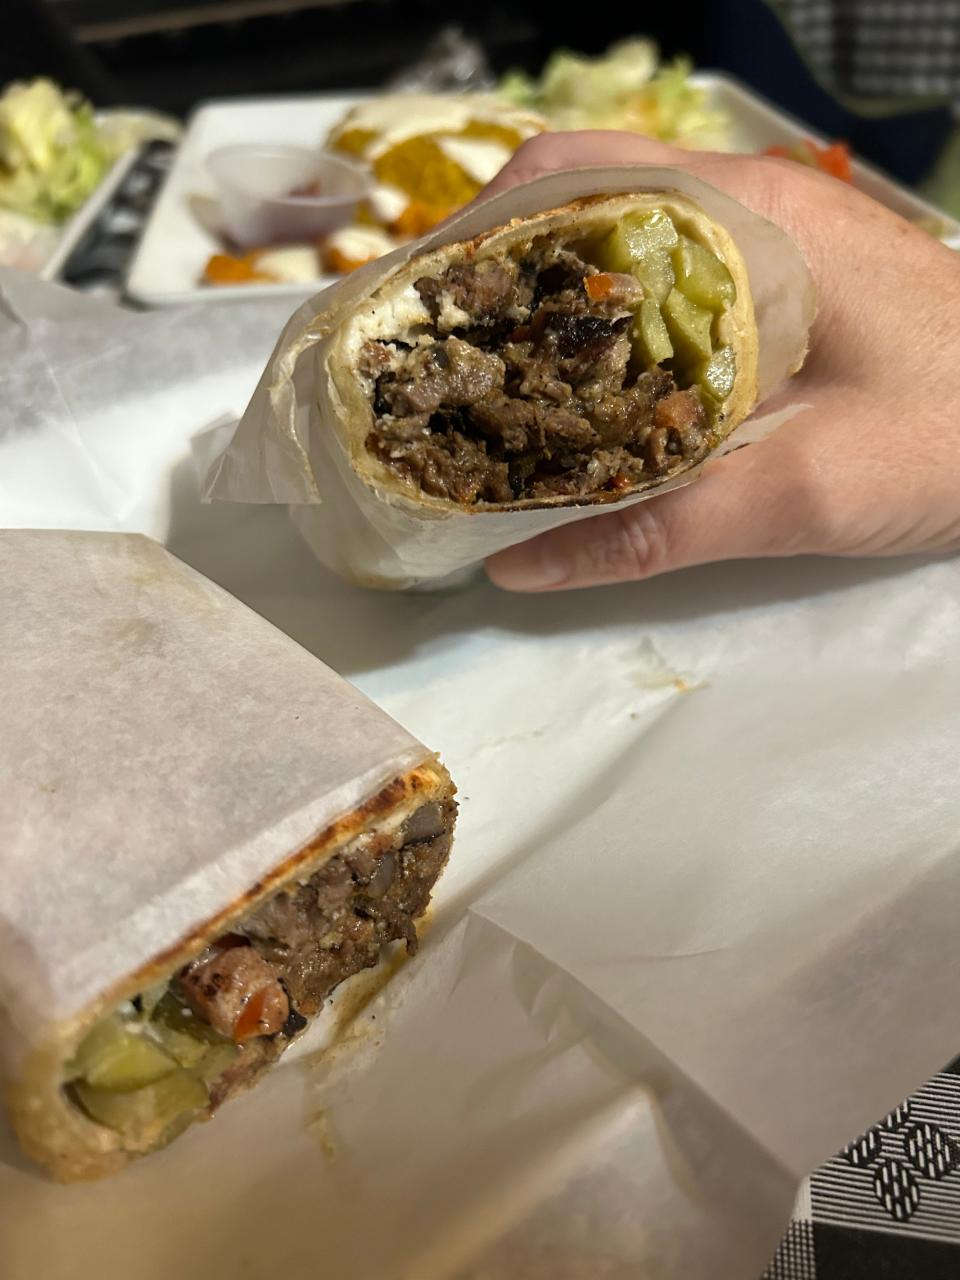 The beef shawarma wrap at Mid-East Cafe and Restaurant.